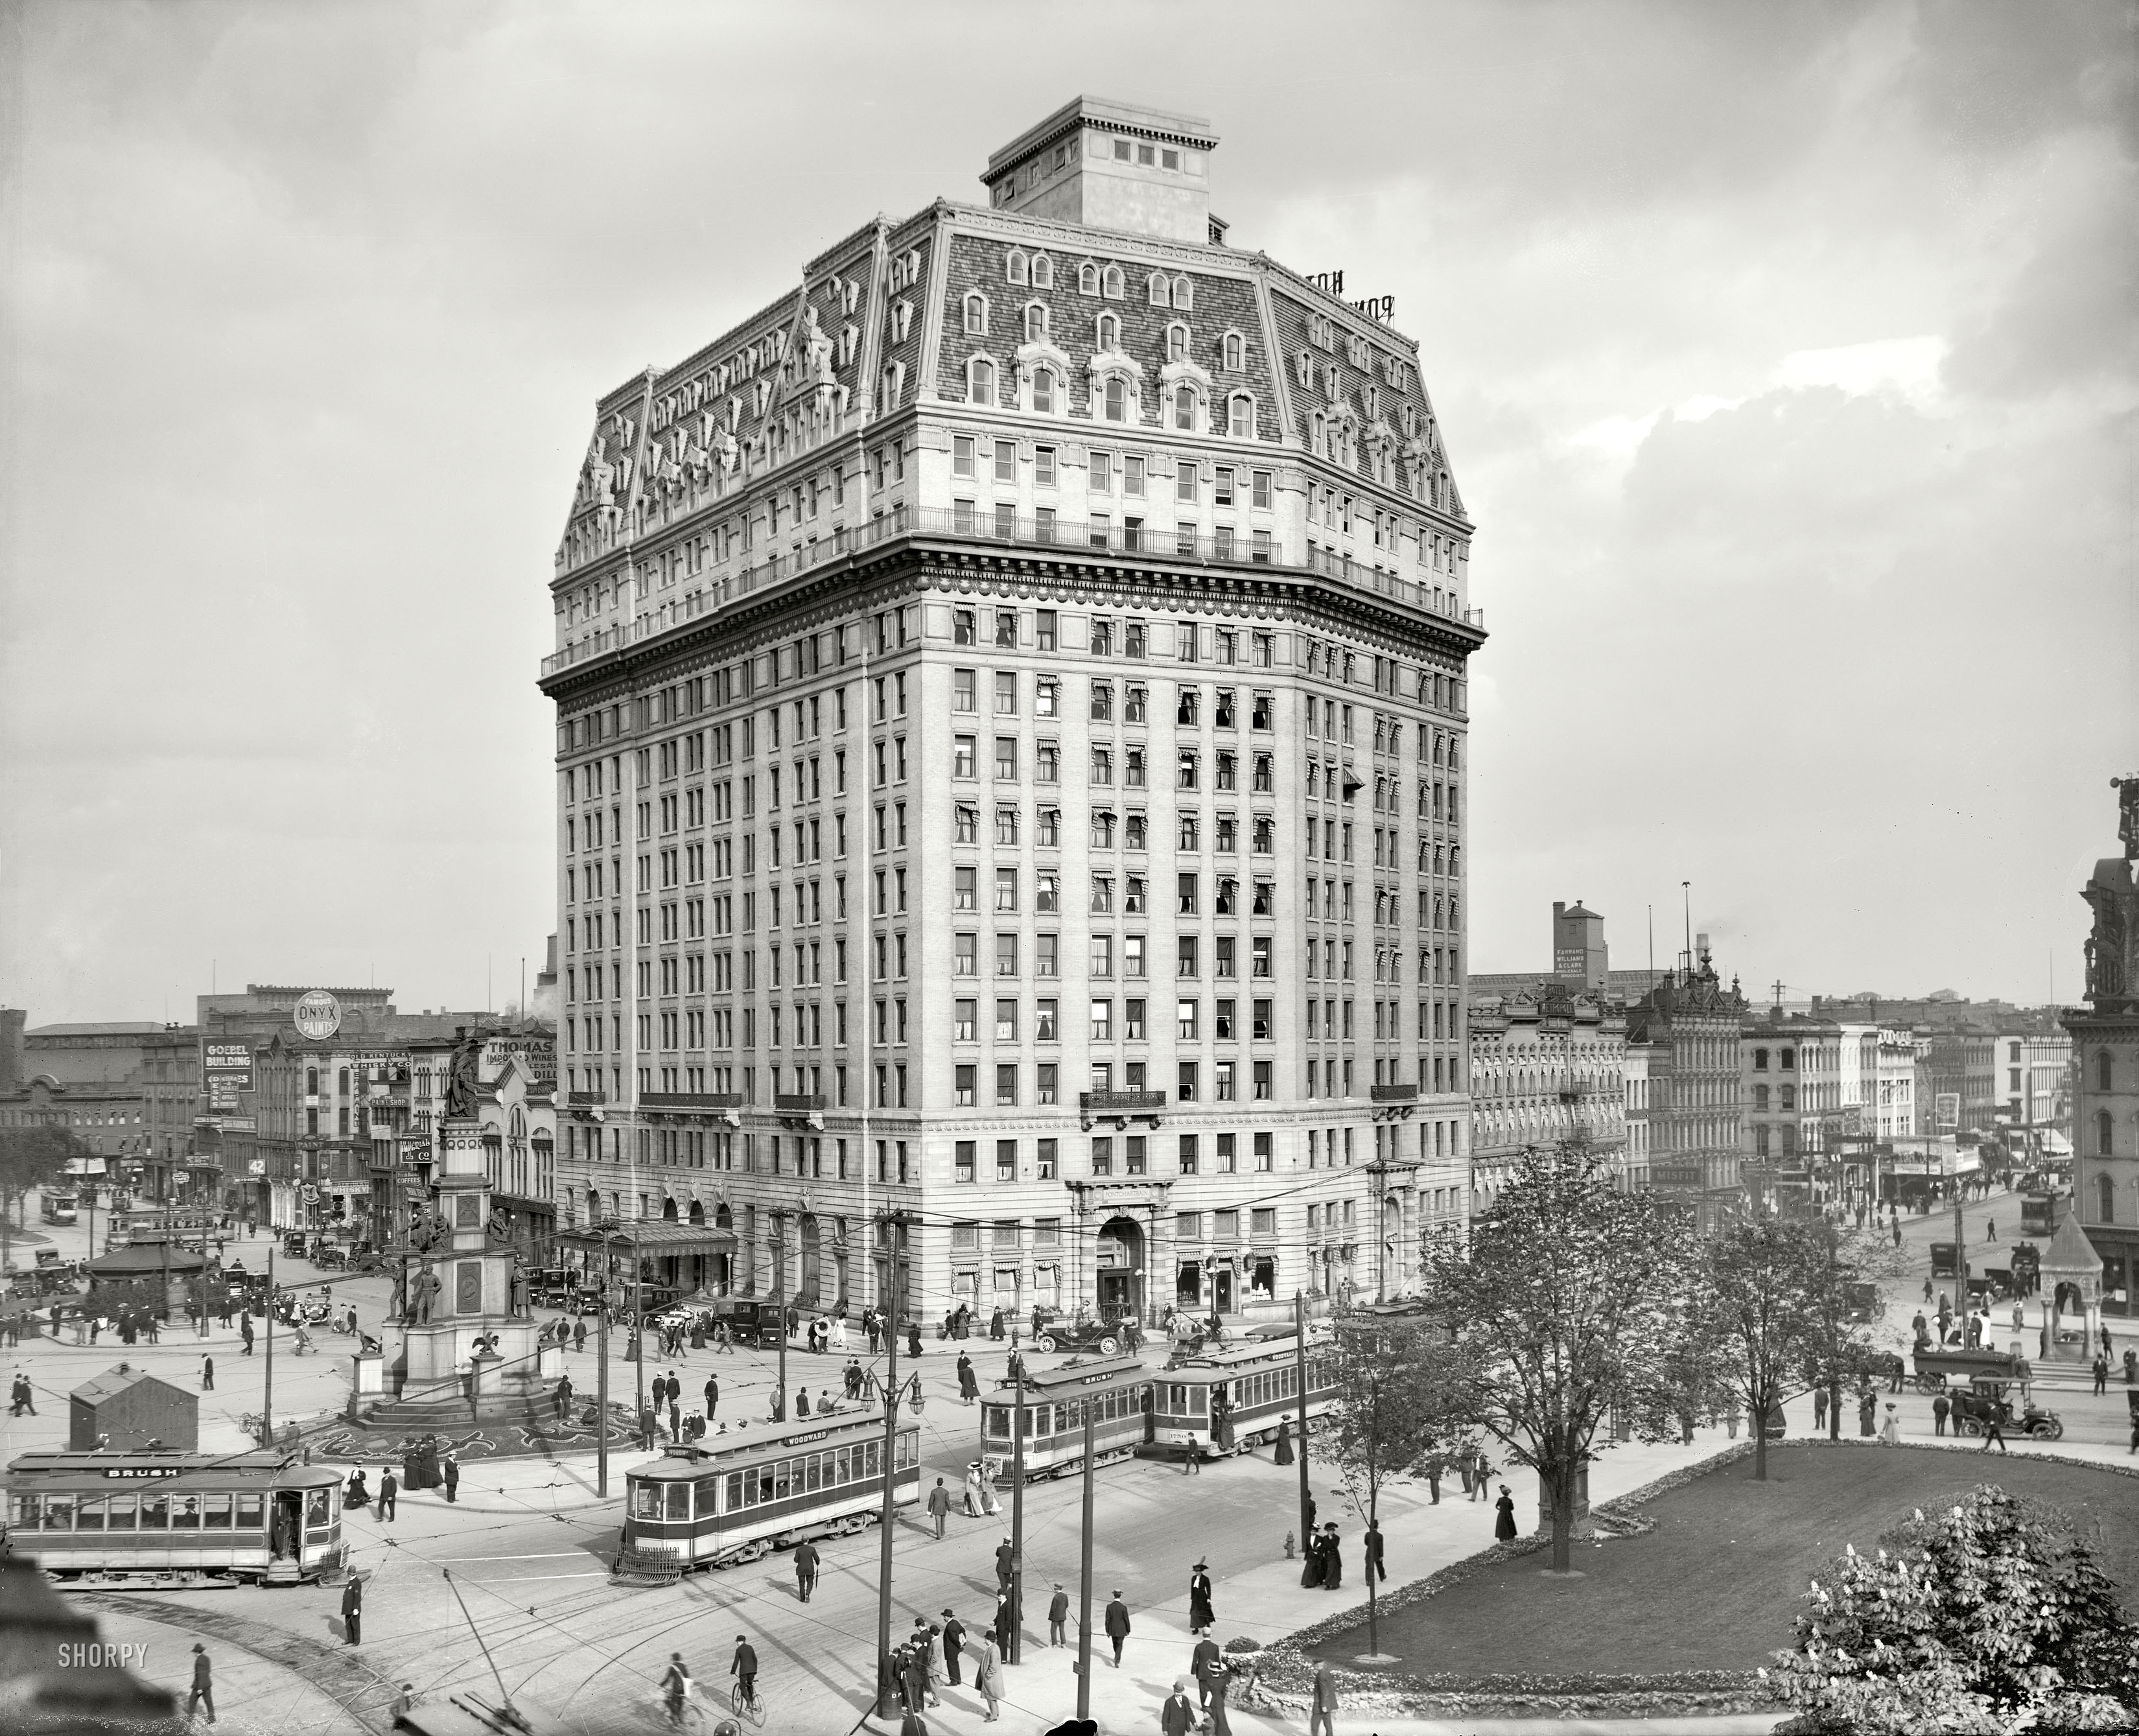 Detroit, Michigan, circa 1912. "Hotel Pontchartrain." Yet another view of this relatively short-lived hostelry on Woodward Avenue, whose downfall was a paucity of private bathrooms. Familiar landmarks include the Soldiers' and Sailors' Monument, Cadillac Square and the Cadillac Chair. 8x10 inch glass negative, Detroit Publishing Company. View full size.